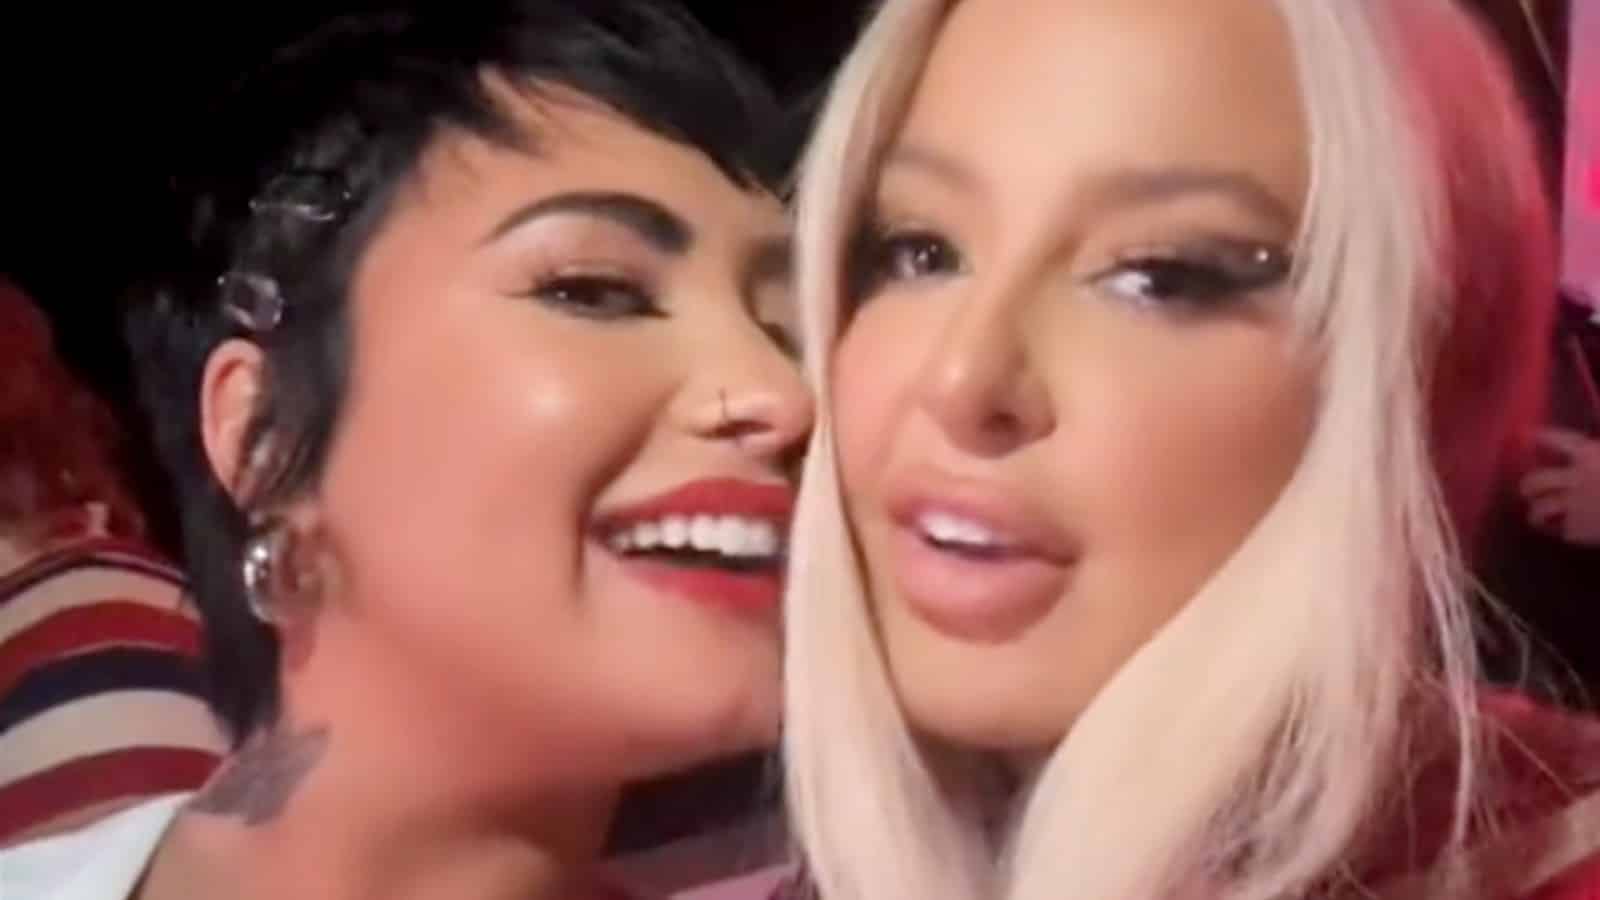 Demi Lovato and Tana Mongeau at a party